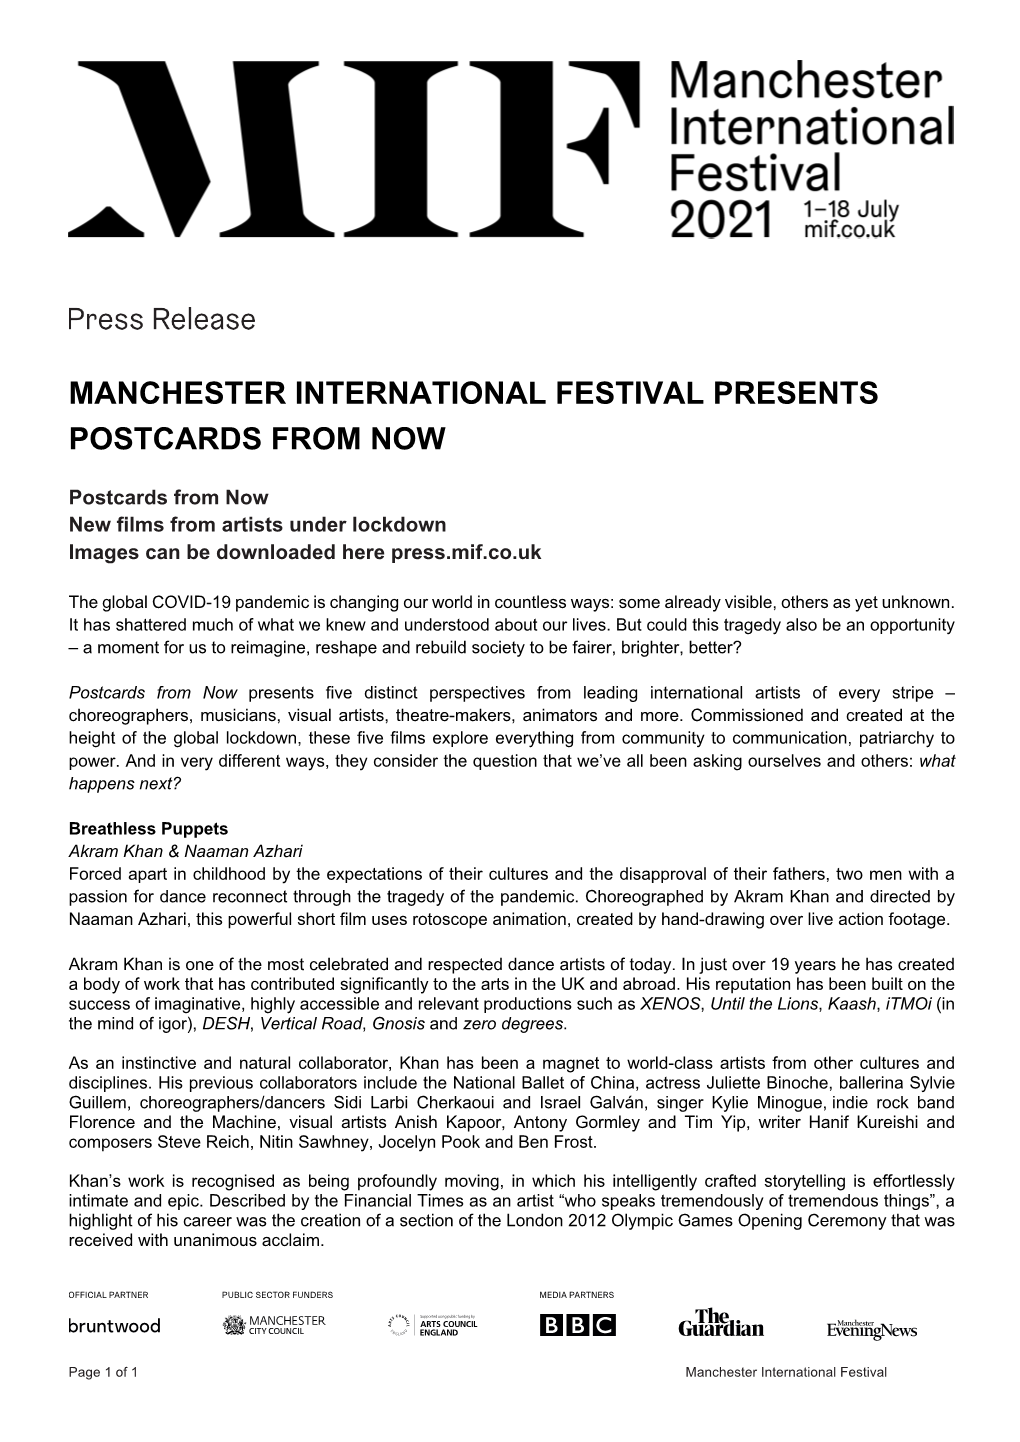 Manchester International Festival Presents Postcards from Now